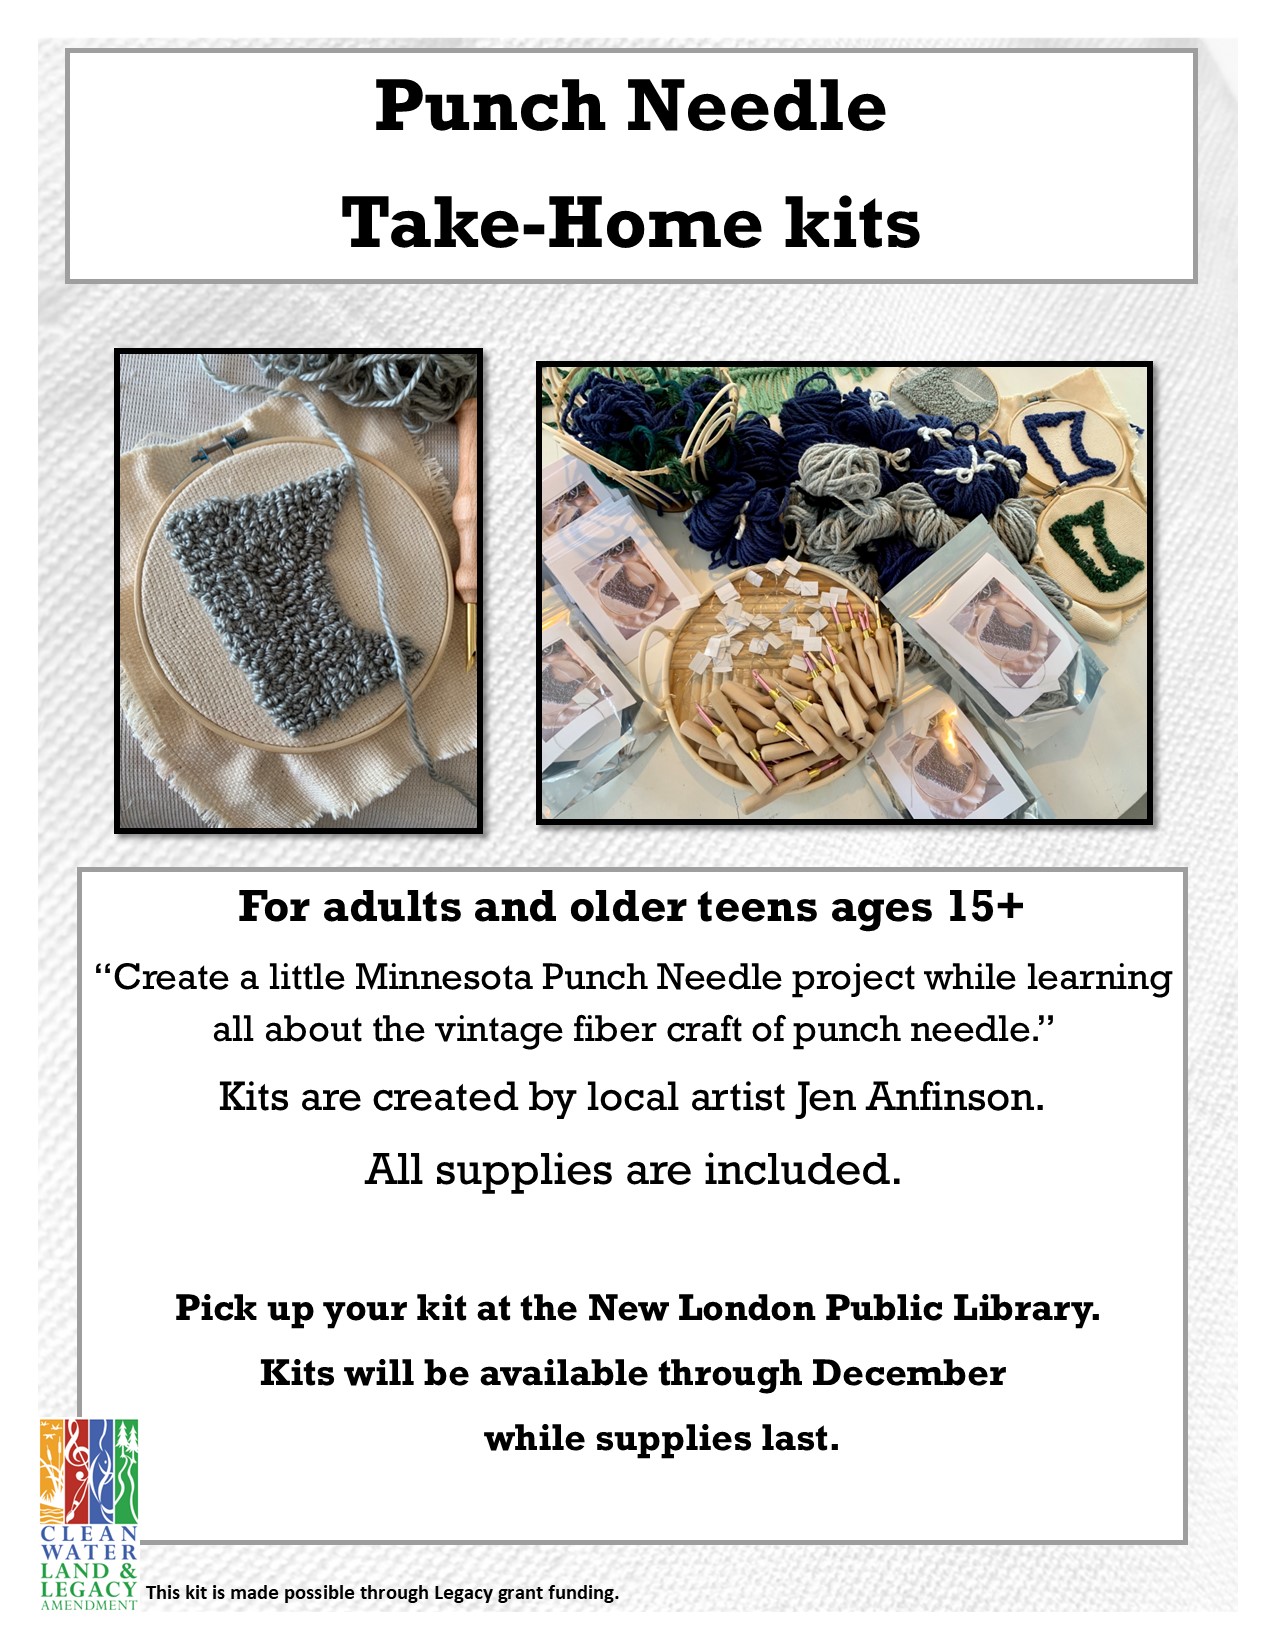 New London Public Library  Take-home Punch Needle Kits